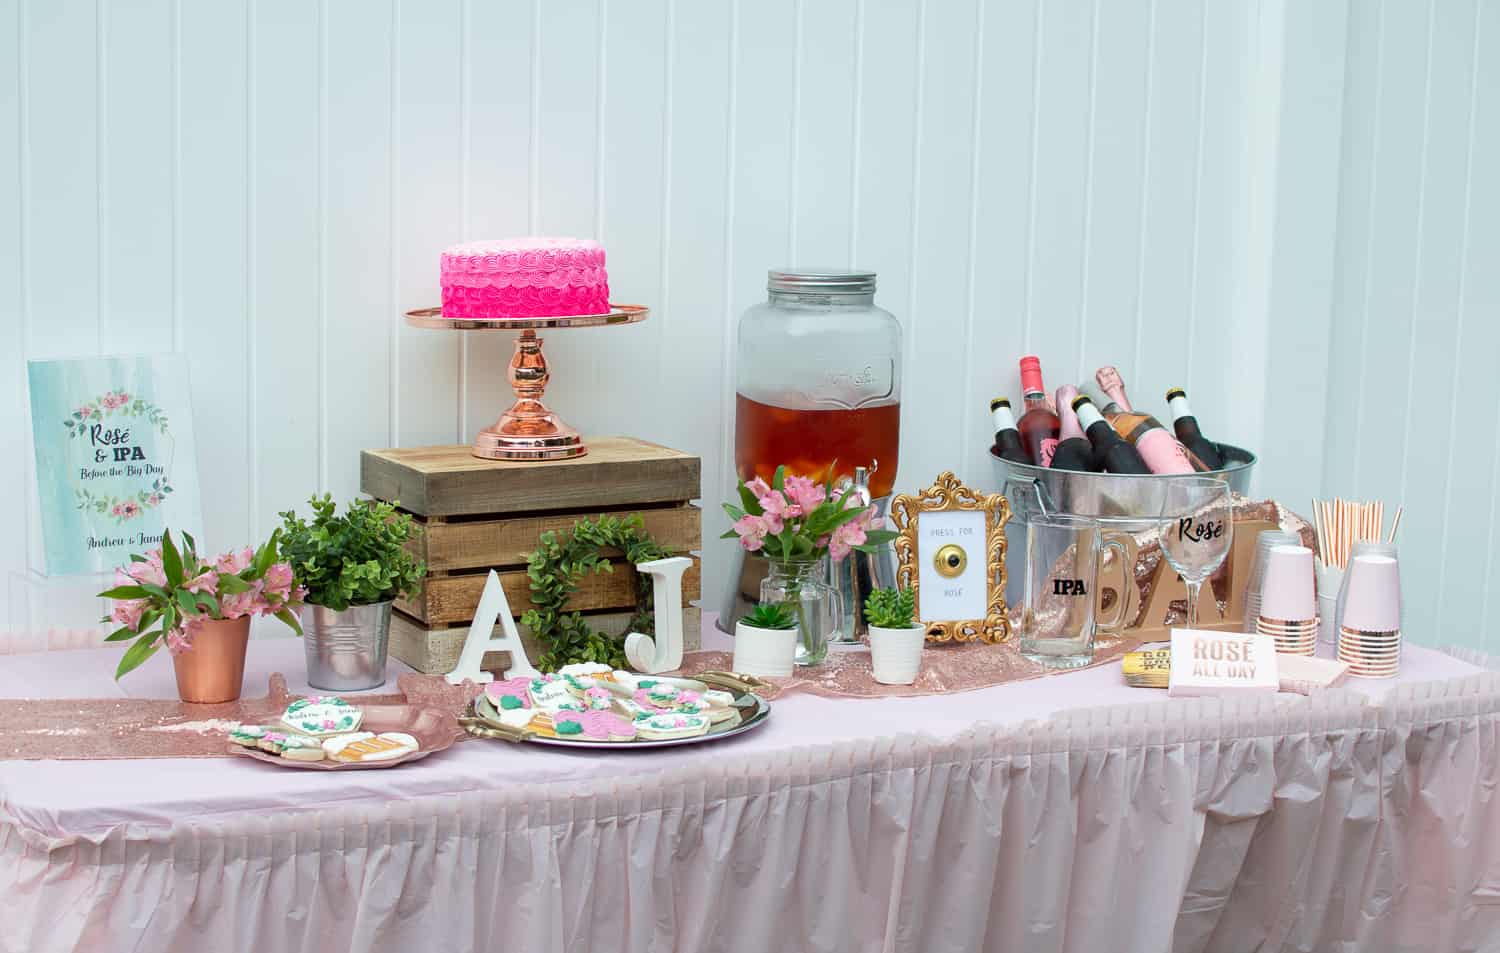 Rosé and IPA dessert and drinks table at a couples wedding shower